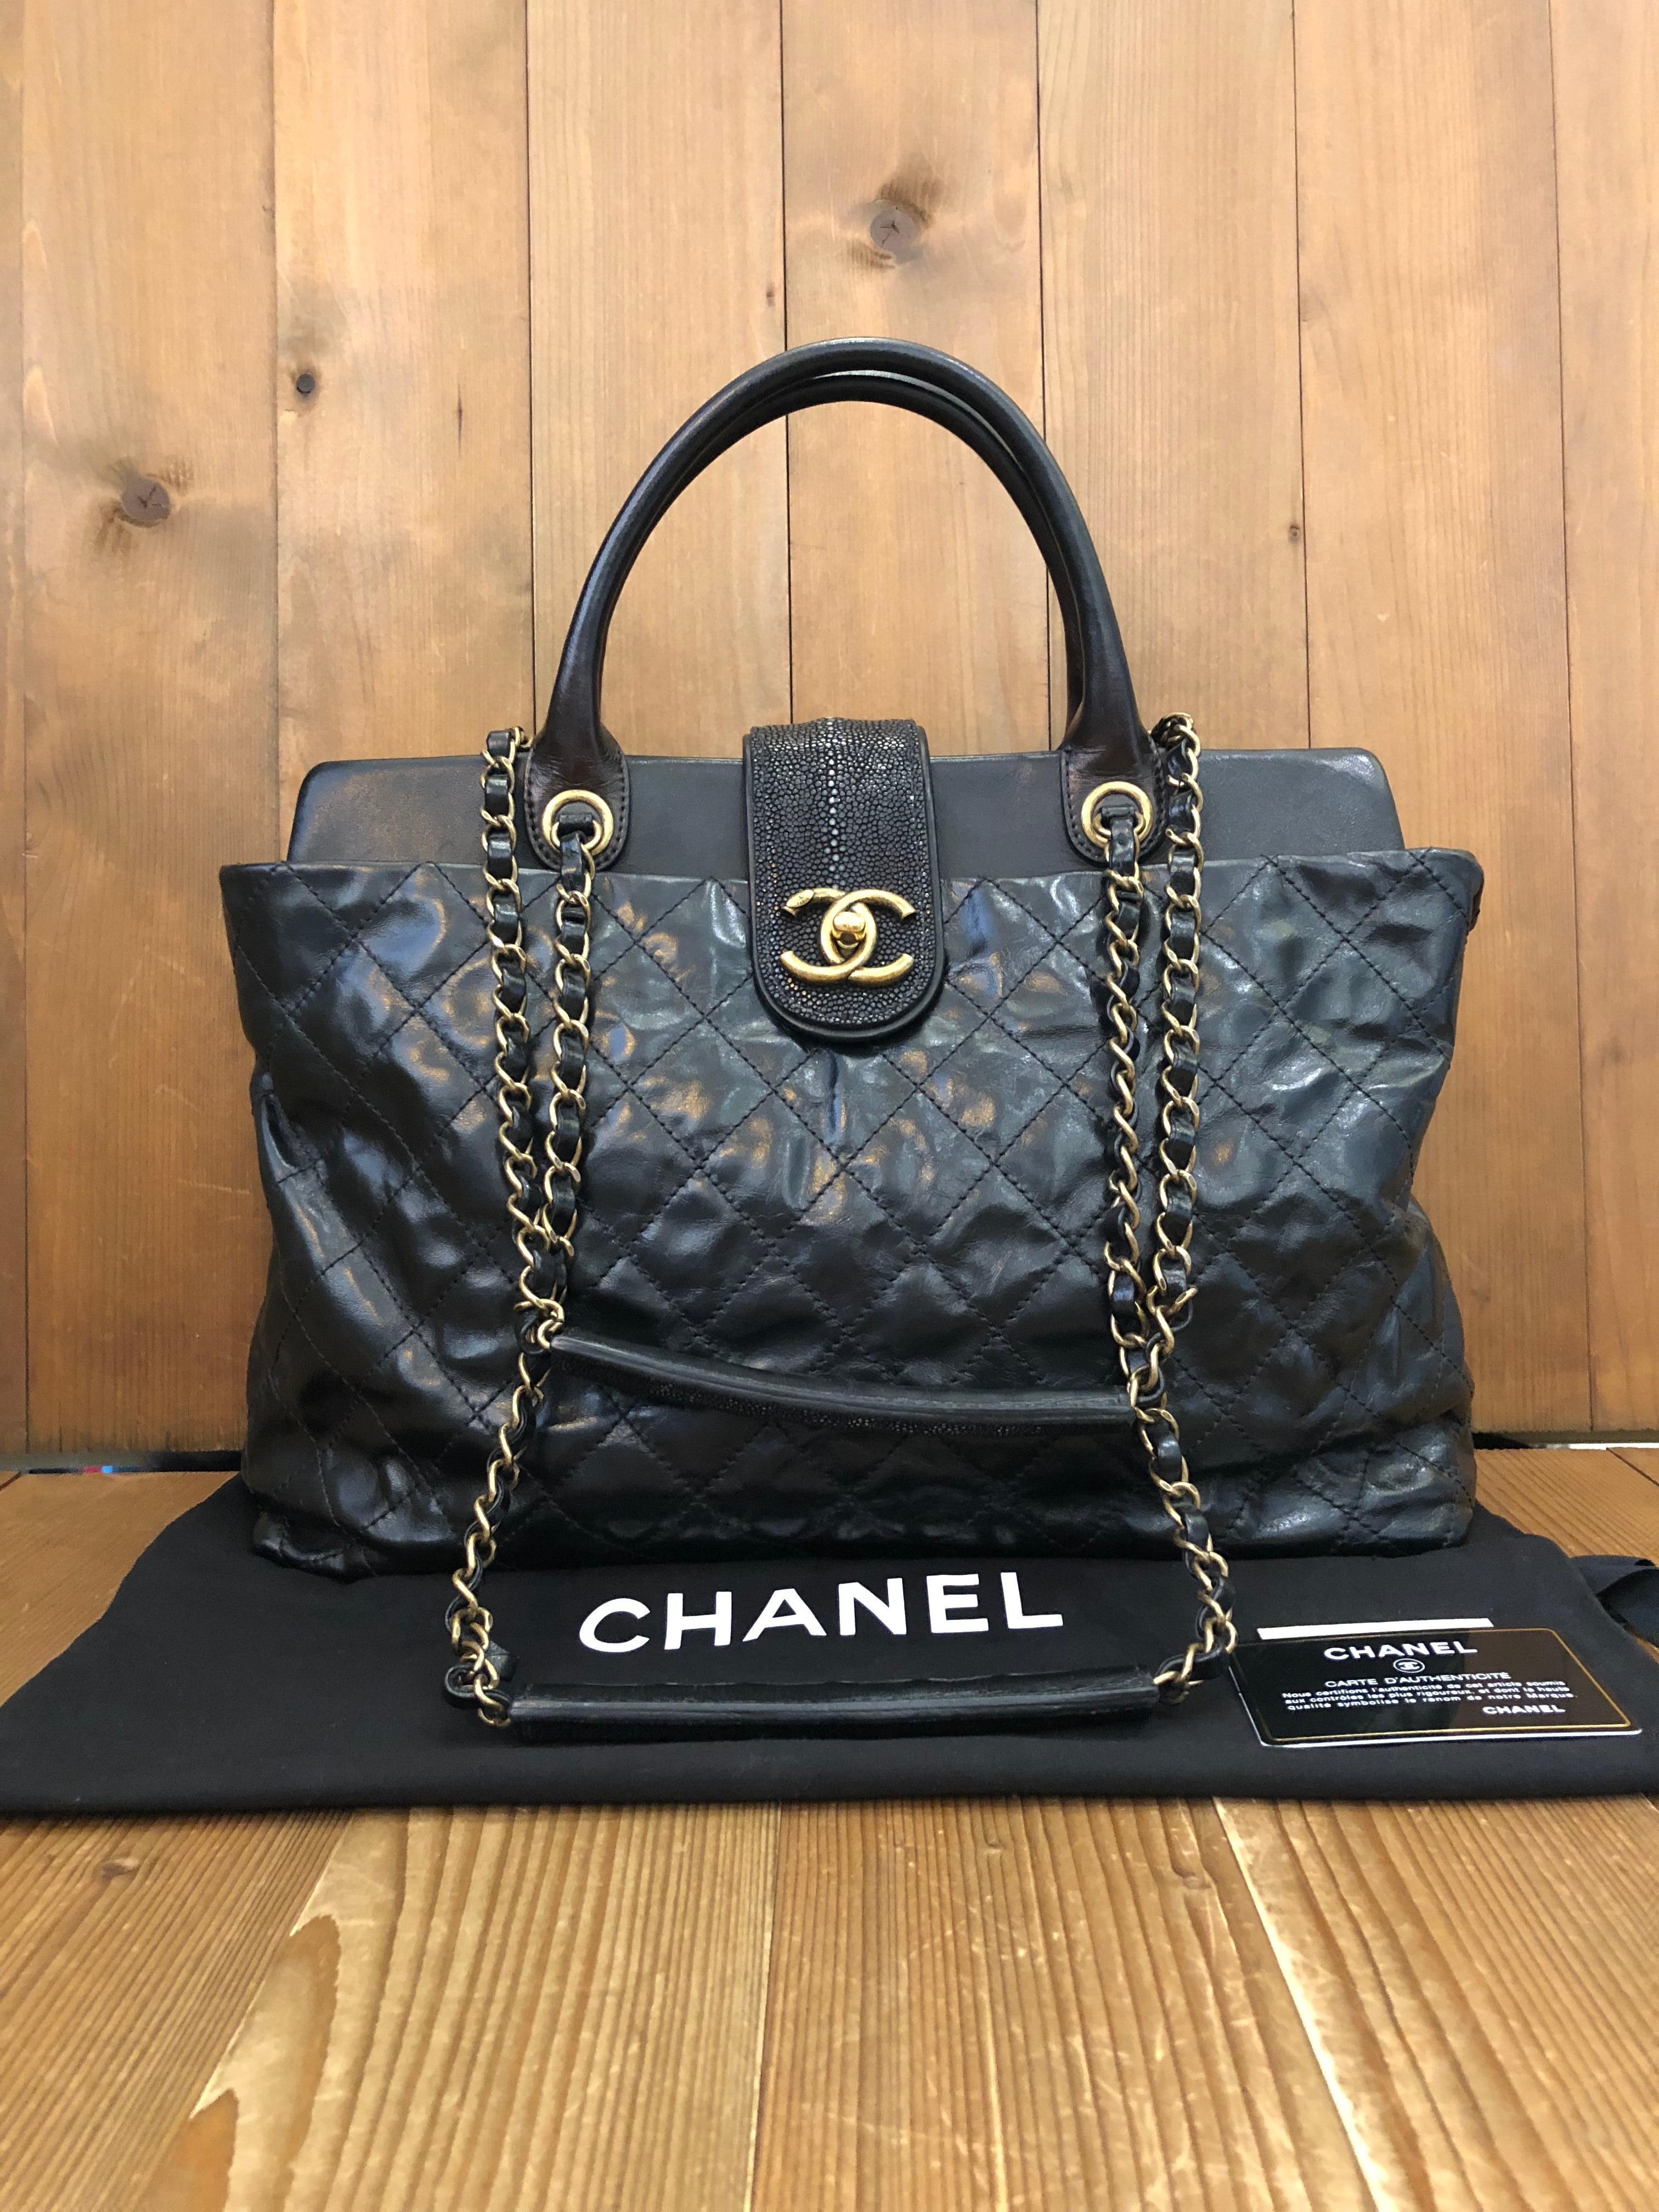 This stylish Chanel Bindi Tote is crafted of distressed calfskin leather and stingray skin in black. This tote features an outer diamond quilted body and a smooth calfskin leather top crest and handles. It also features aged gold toned leather chain